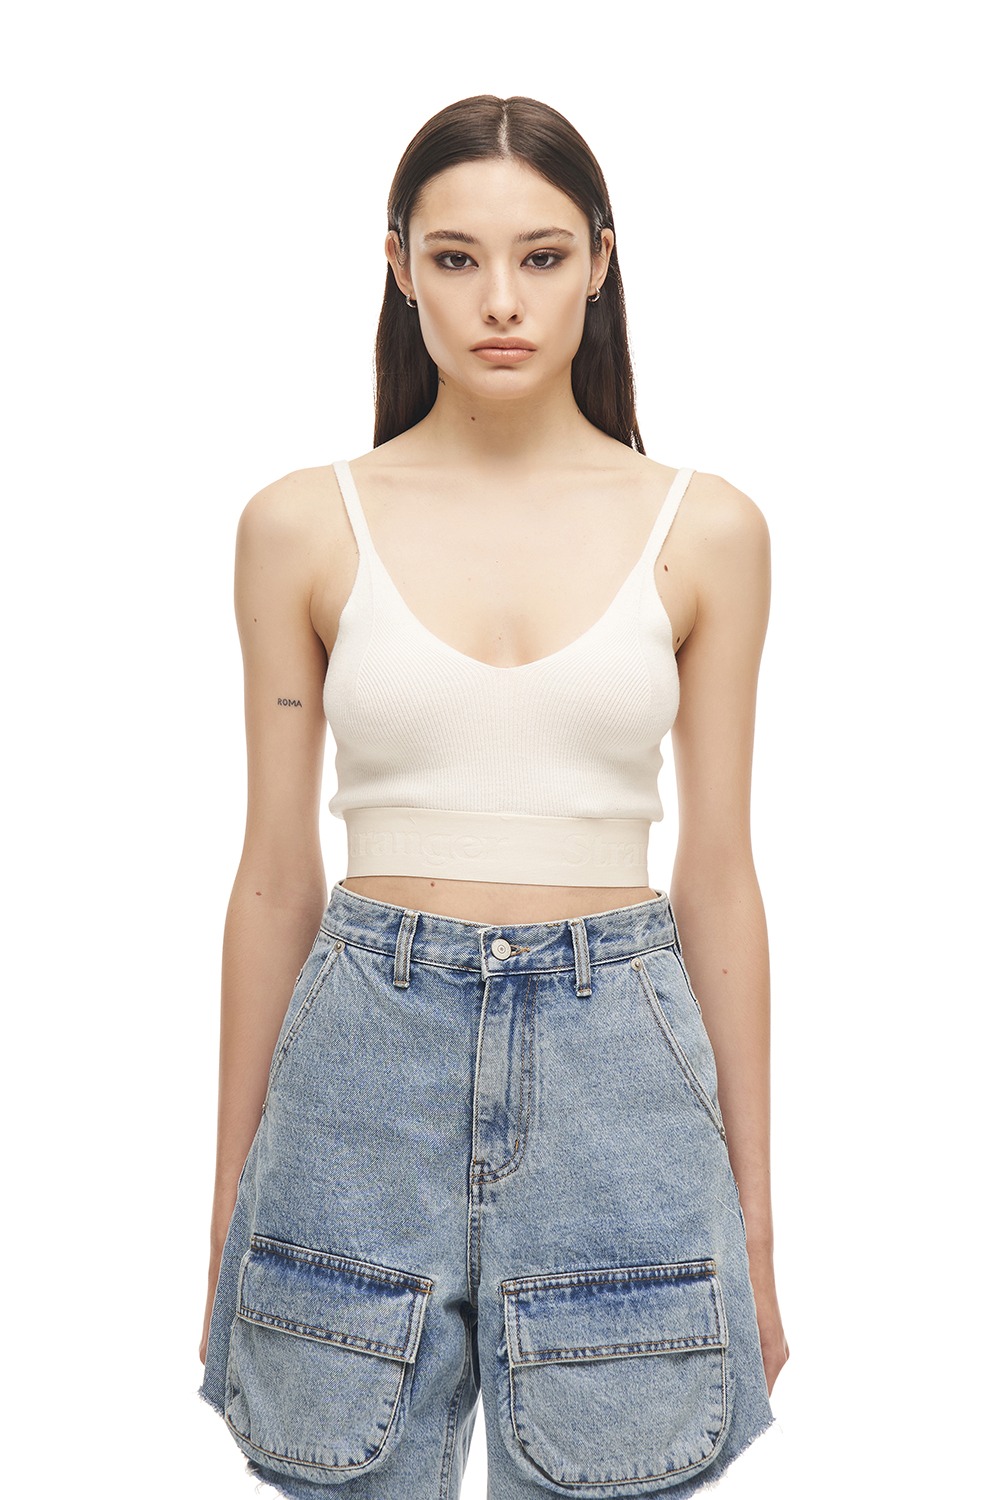 DOWNTOWN GIRL TOP (WHITE)